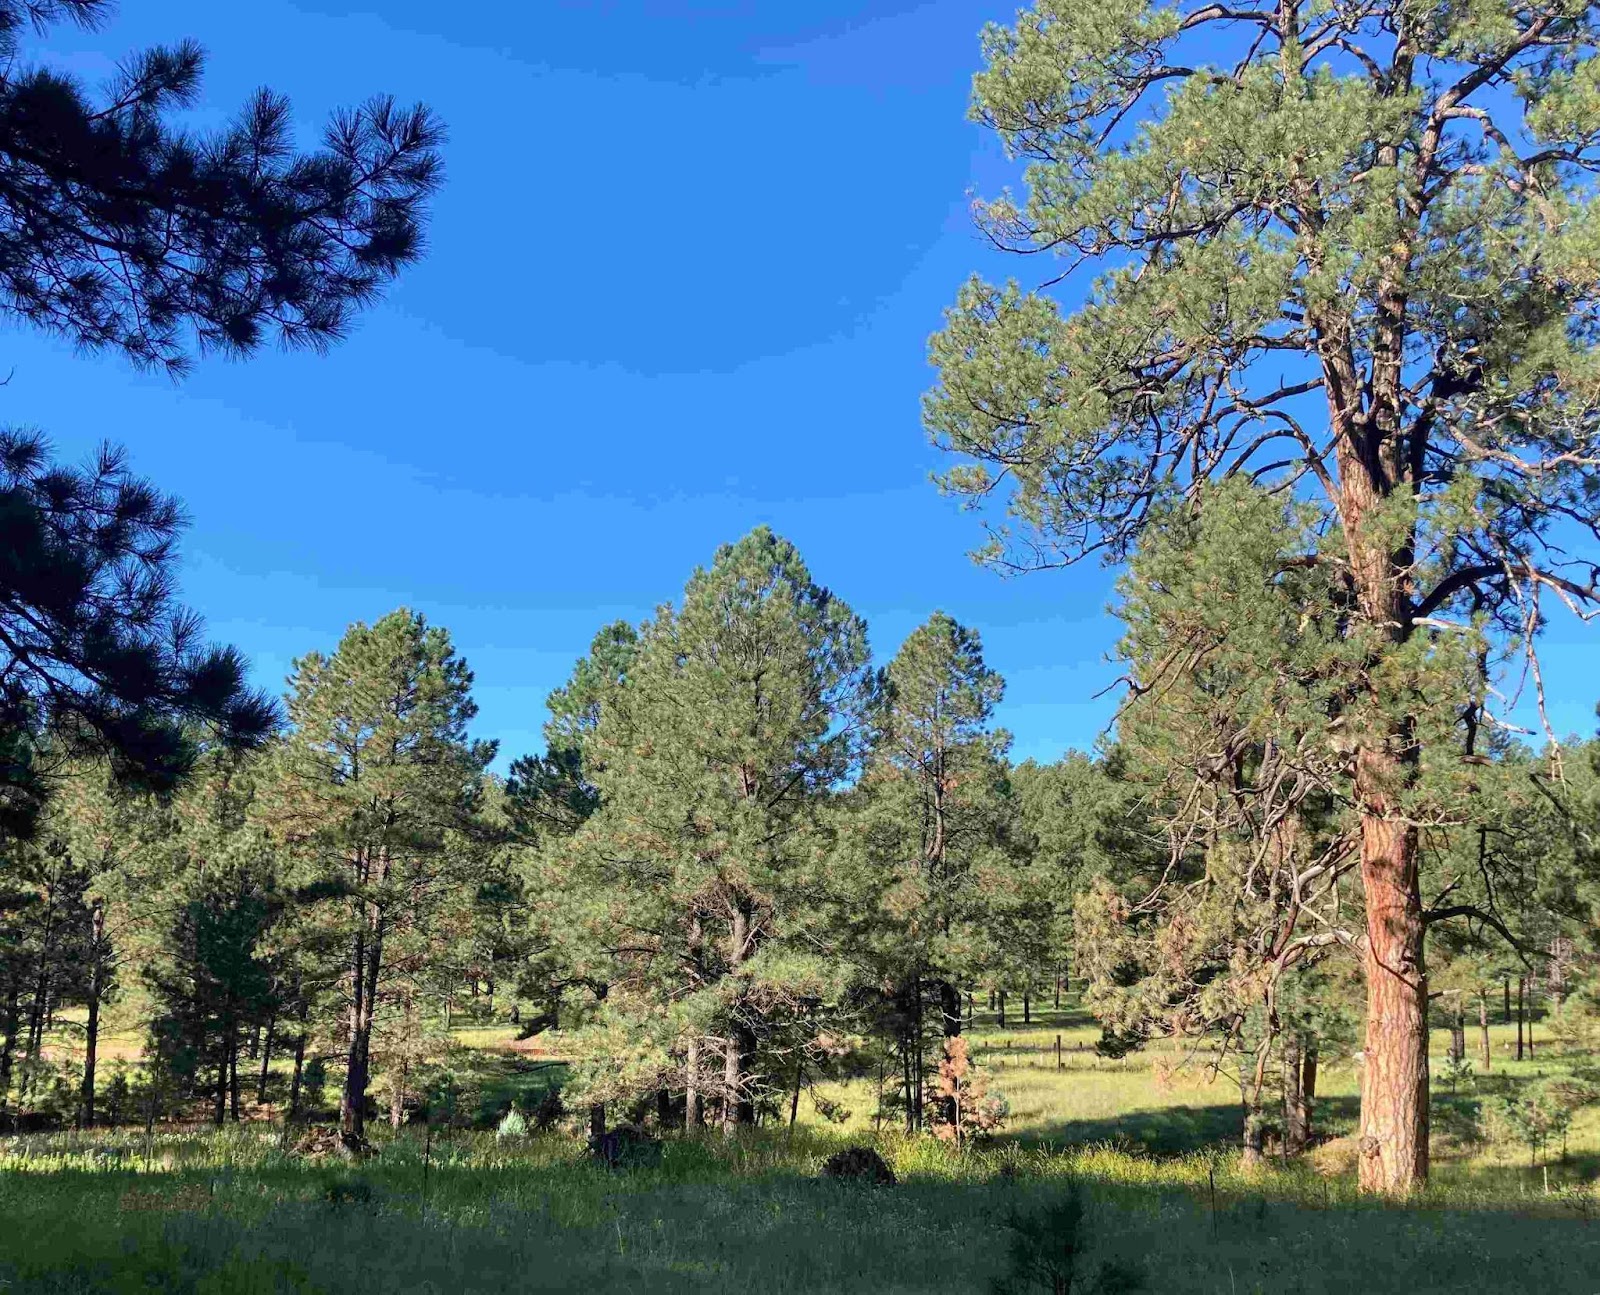 A photo of an open grassy woodland of pines stretching off into the distance beneath a brilliantly blue sky. The whole scene is lovely, green, and vibrant. The largest pines have pale, orange bark while the smaller ones have black bark, a characteristic of ponderosa pines, which change color at maturity.